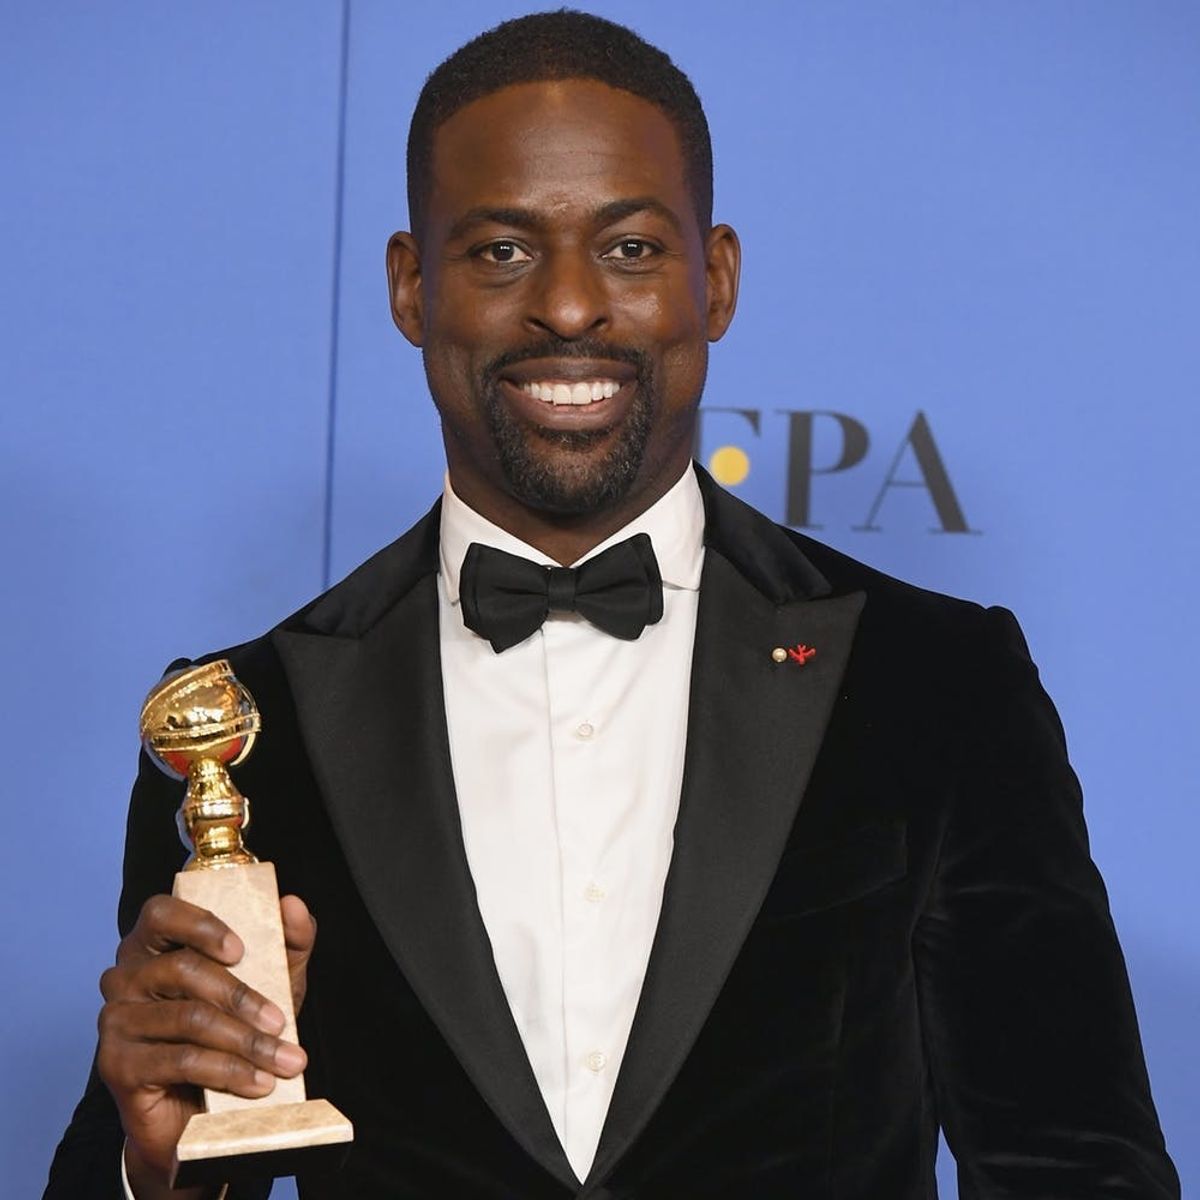 ‘This Is Us’ Star Sterling K. Brown Made Golden Globes History